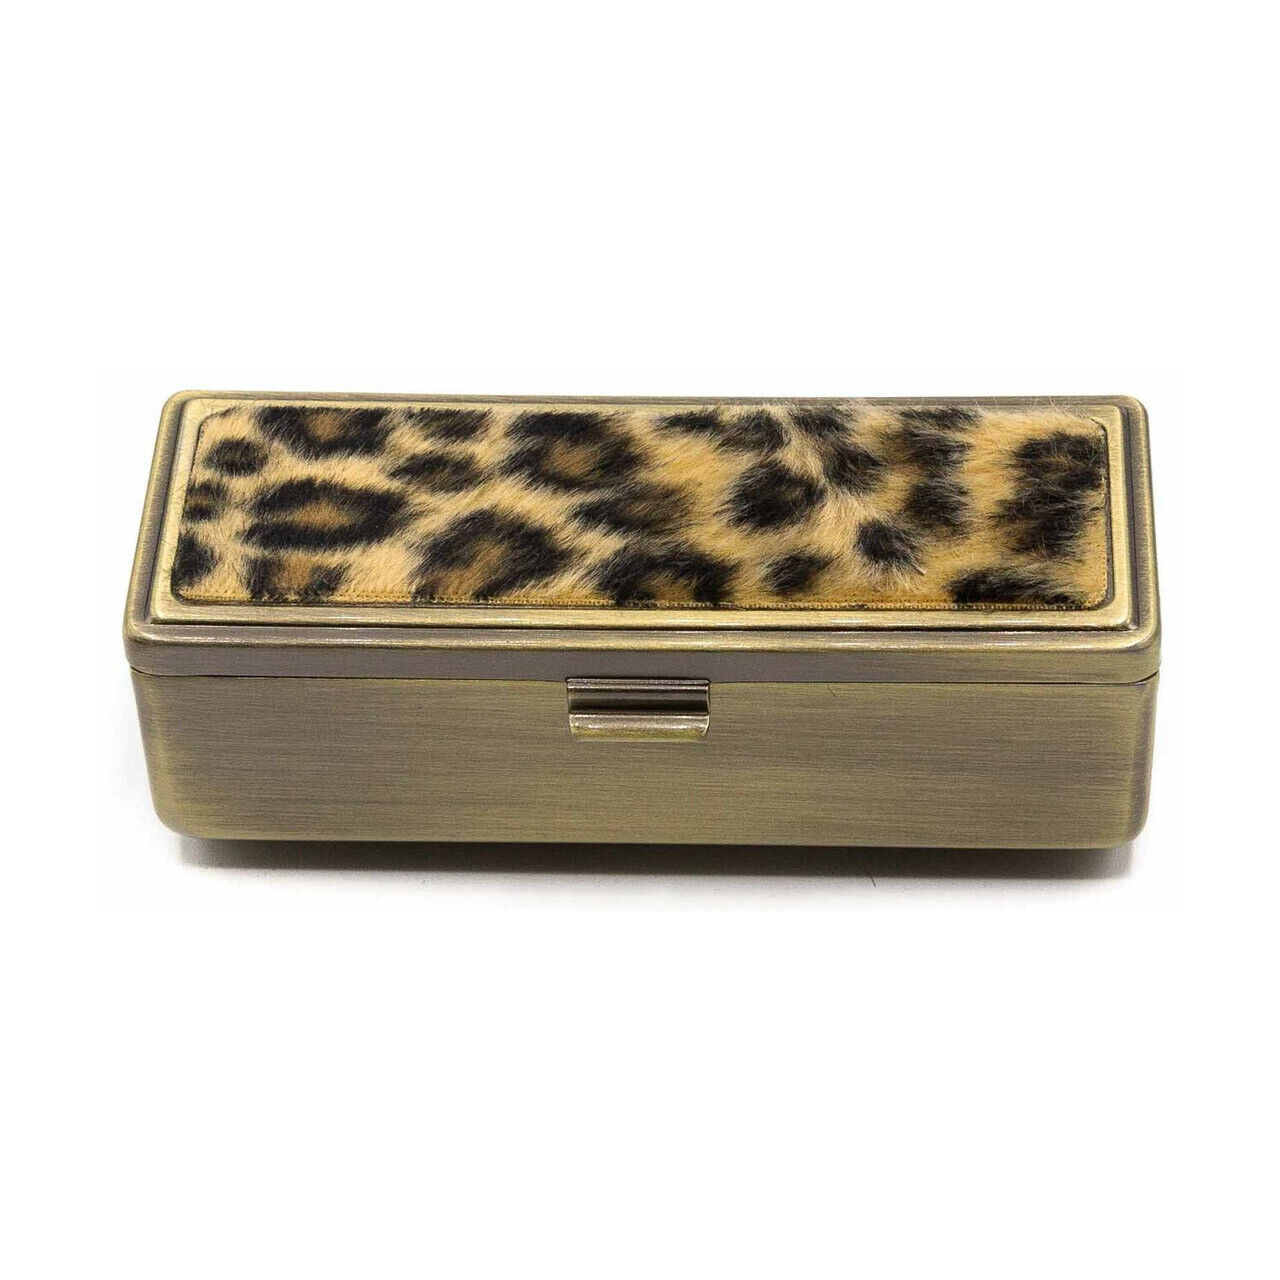 Leopard Print Boxed Travel Lipstick Case With Mirror